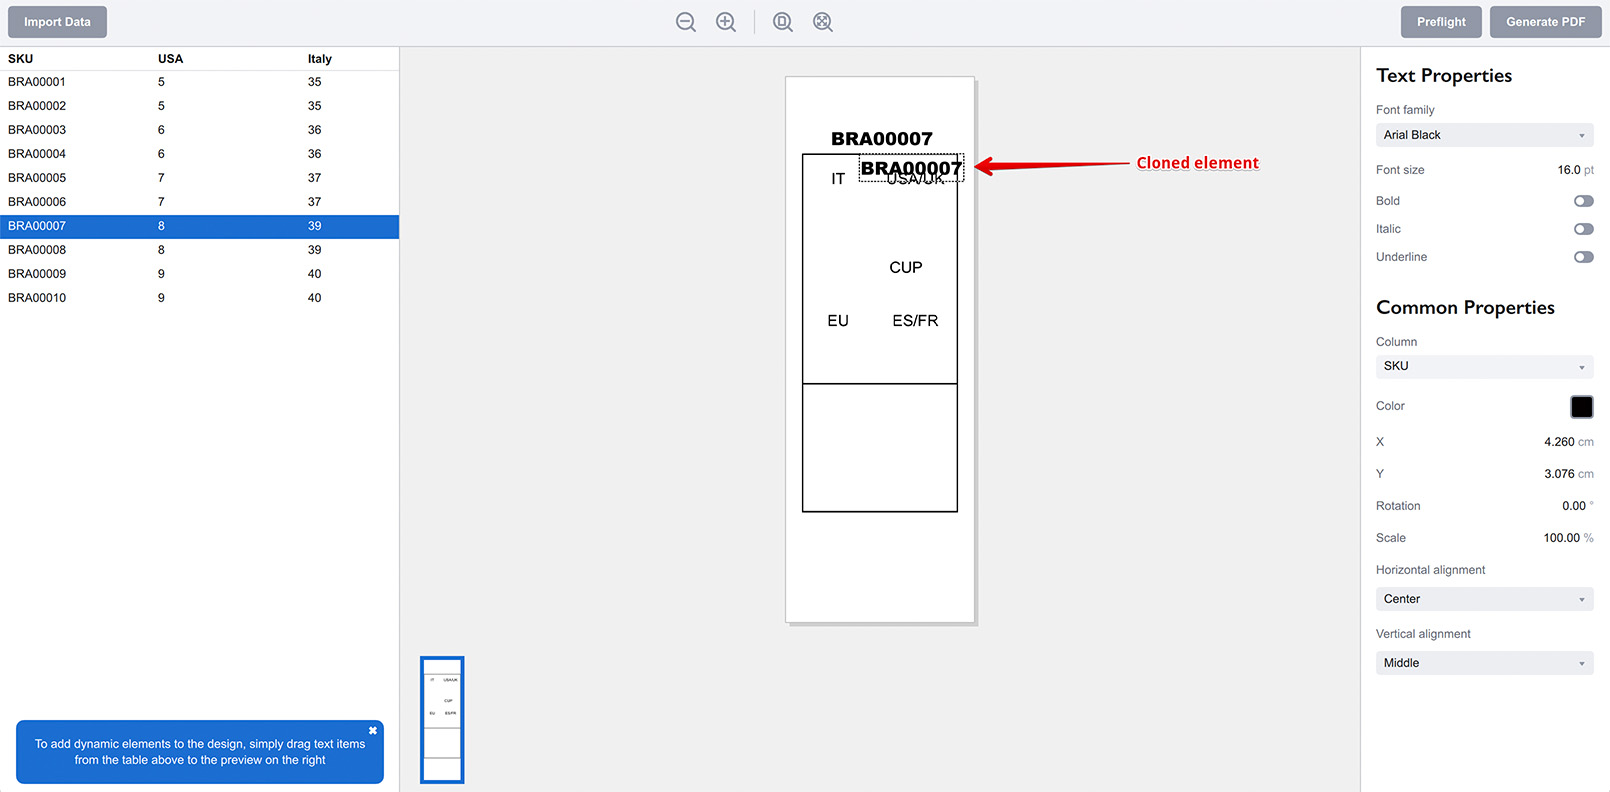 Cloning the SKU element using copy and paste